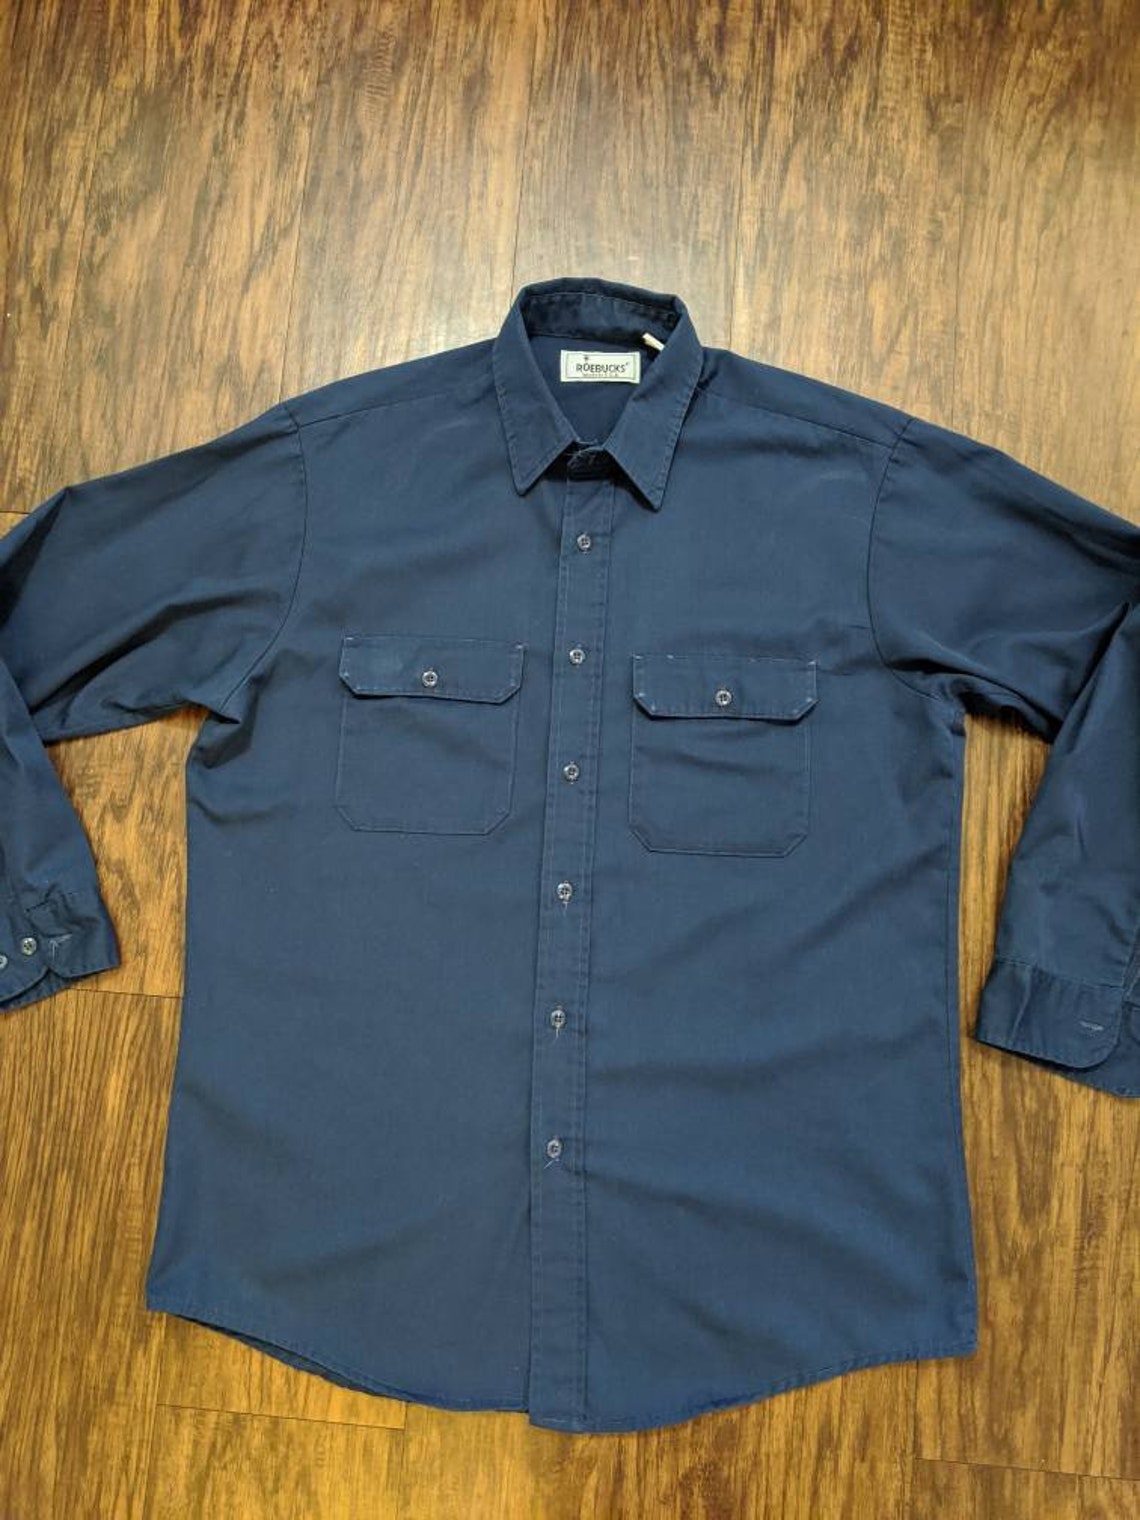 Roebucks 2 Pocket Shirt Made in USA 80s/90s Vintage Button up | Etsy